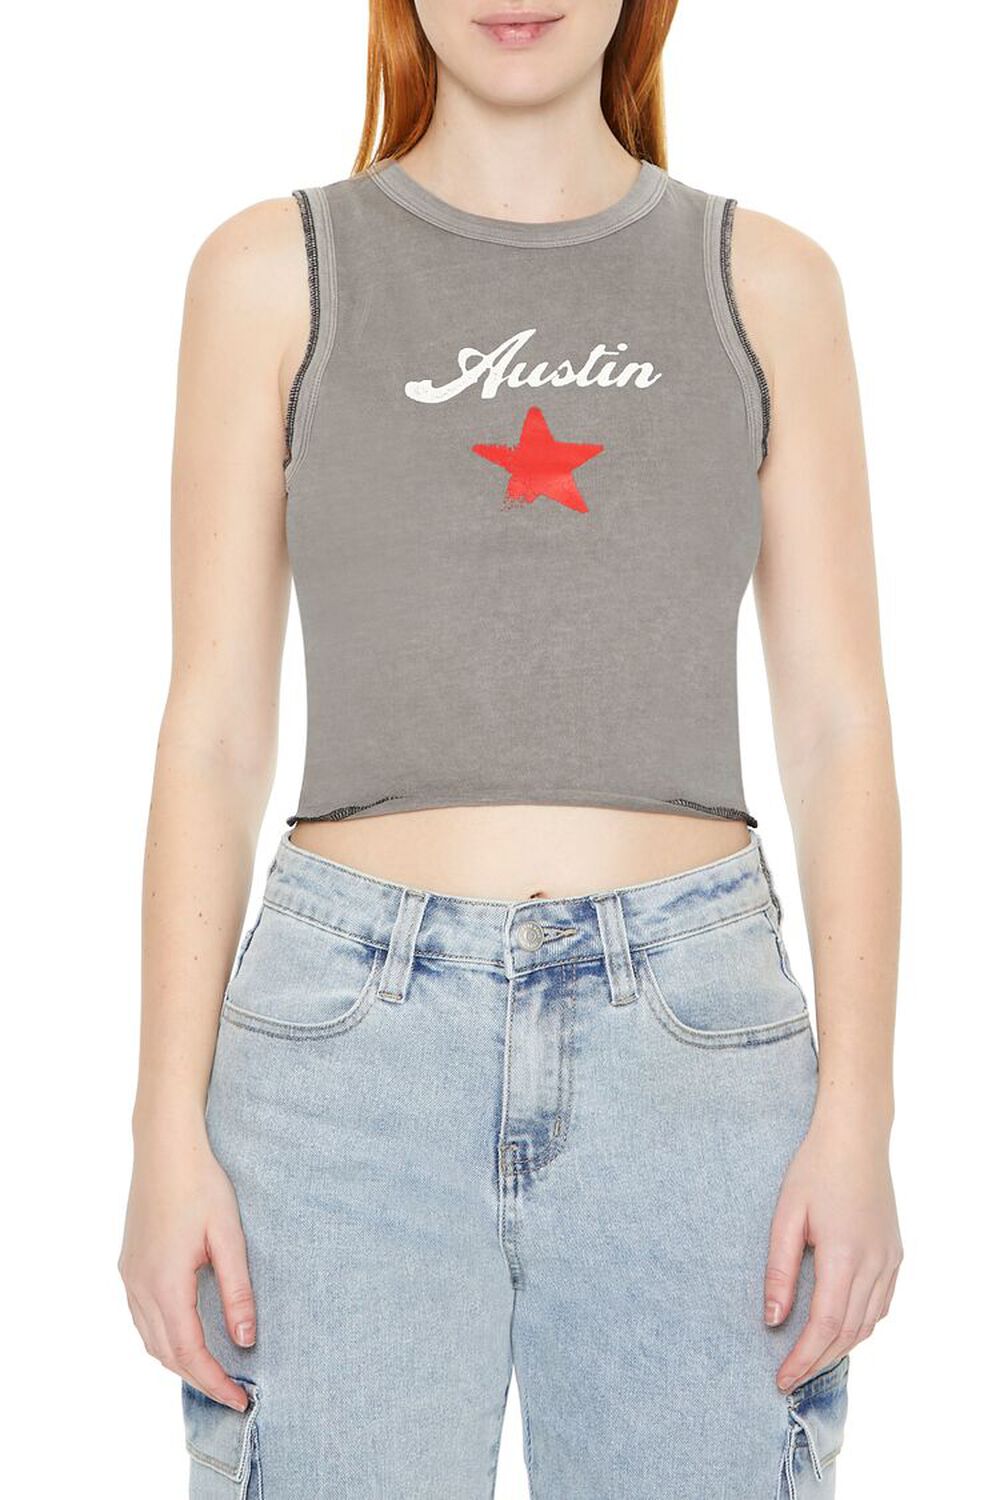 CHARCOAL/MULTI Cropped Austin Graphic Tank Top, image 1